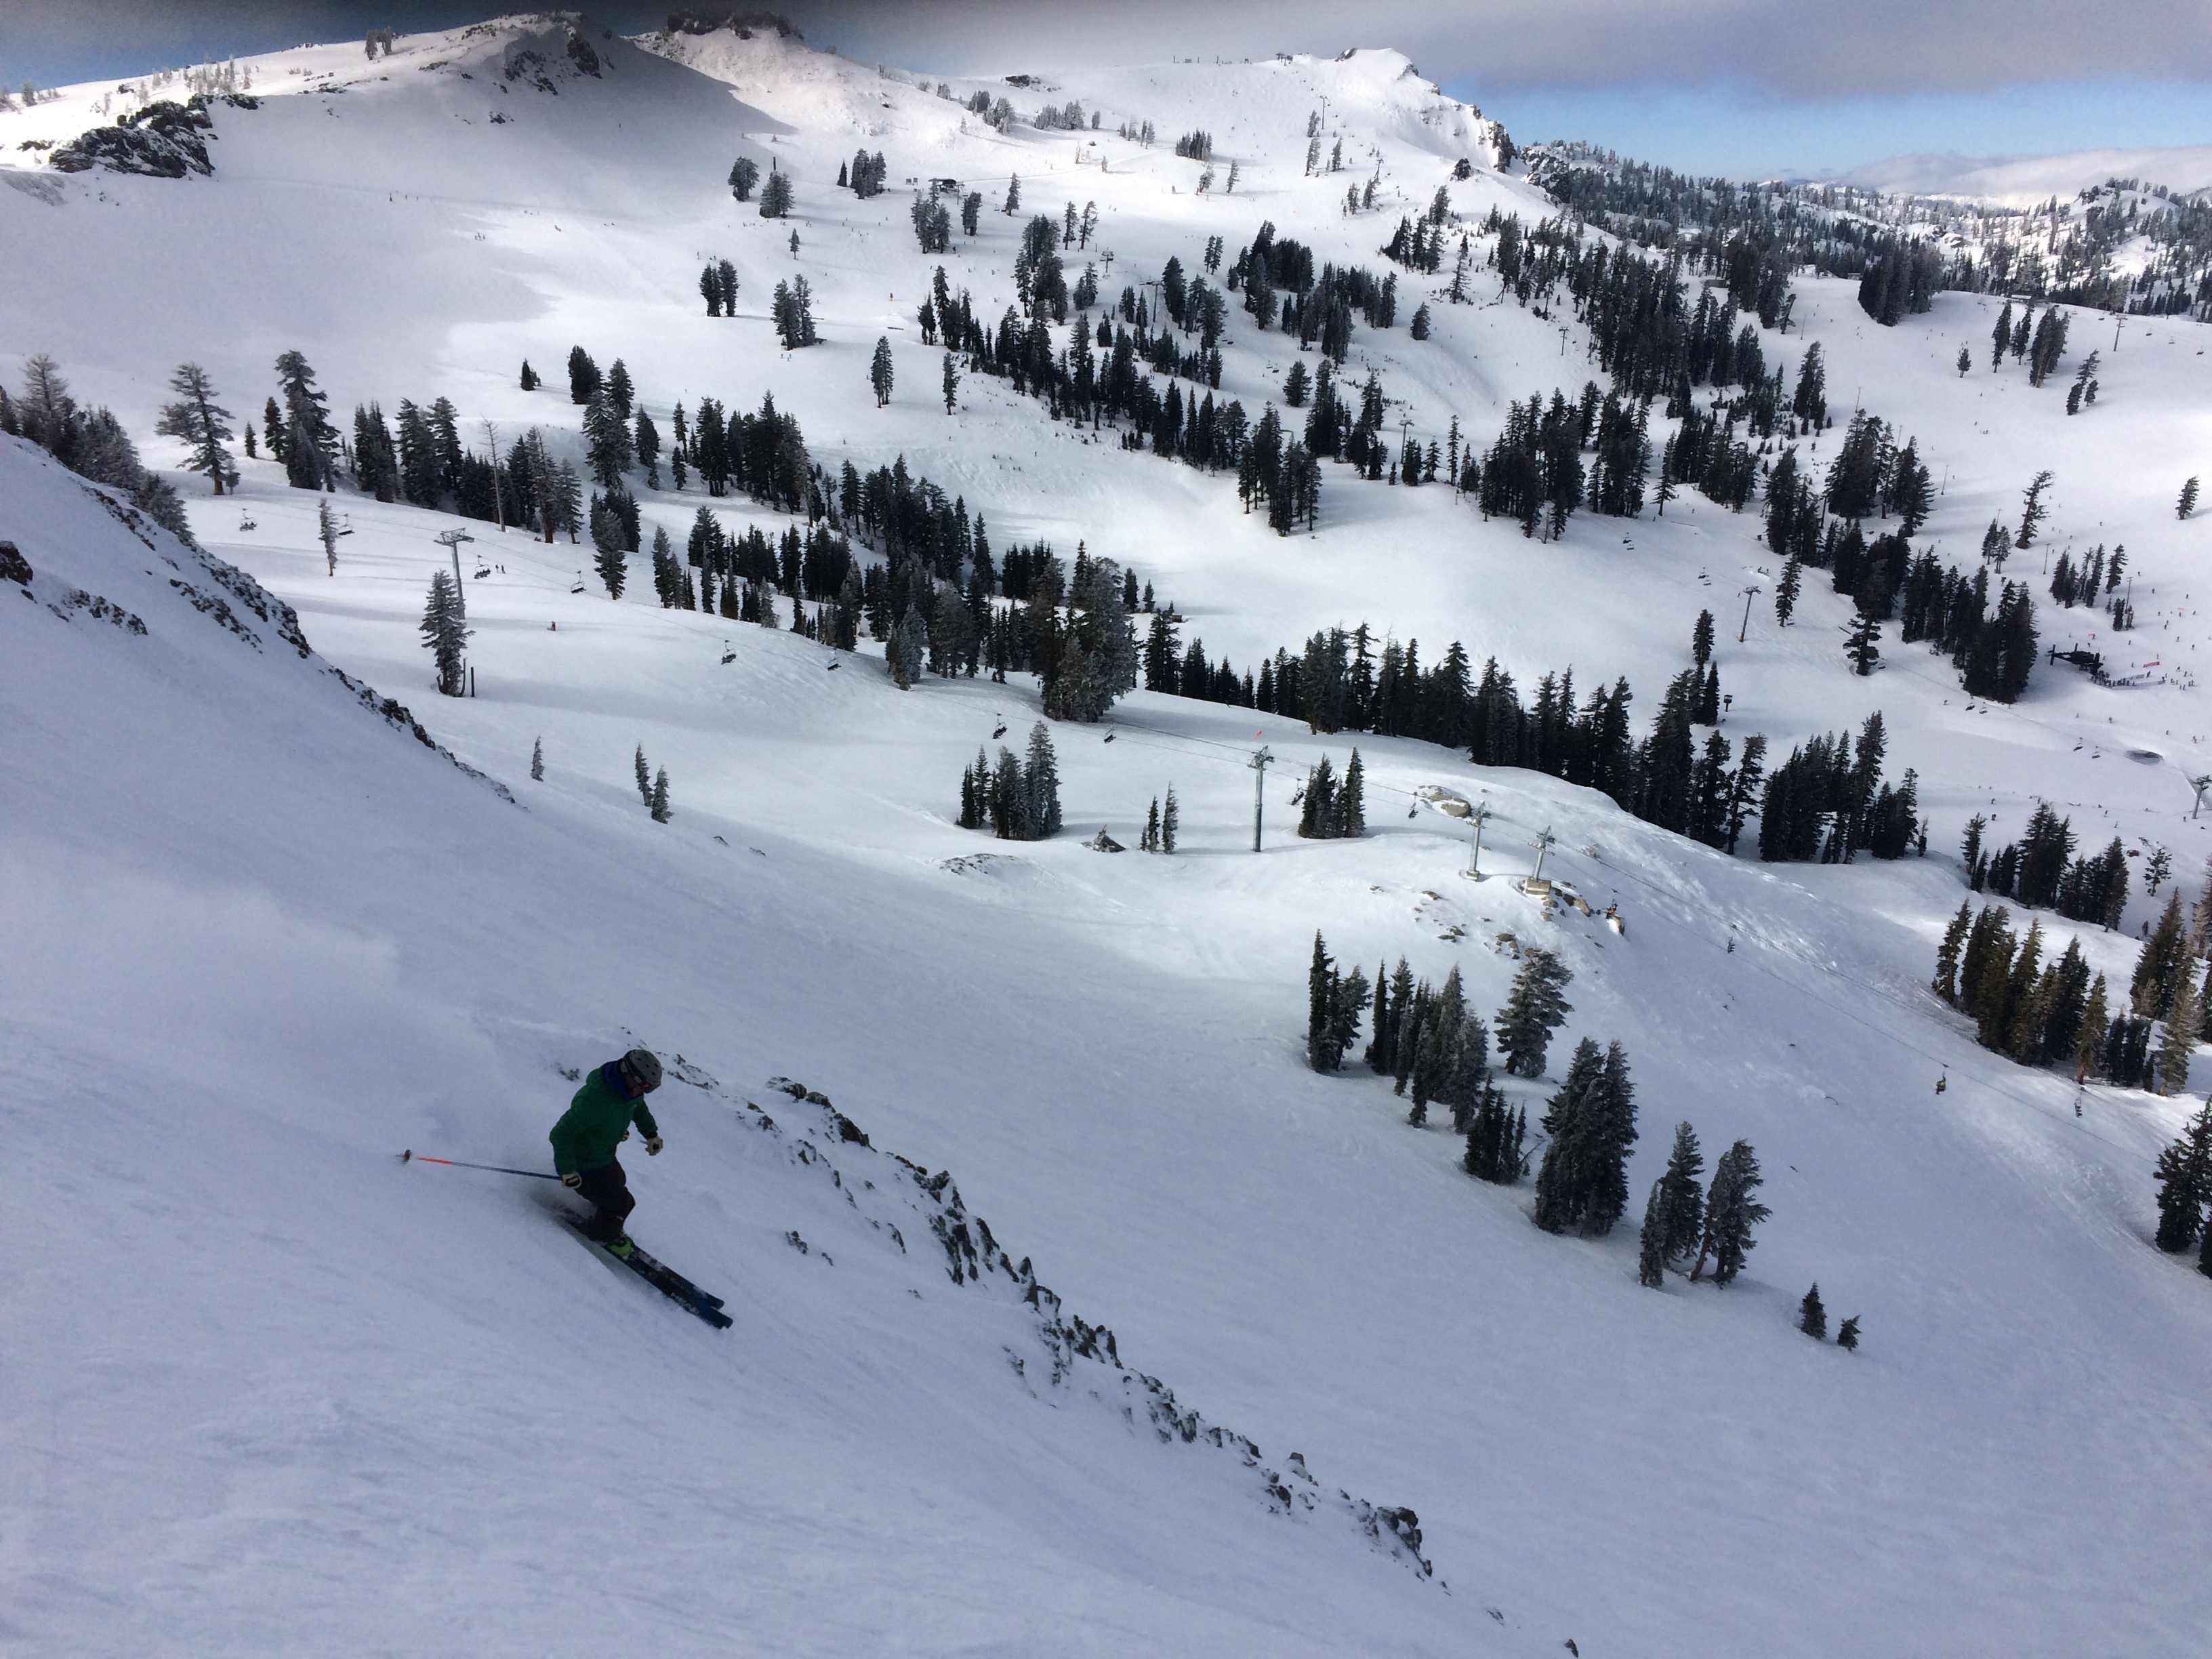 North Bowl, Squaw, Yesterday.